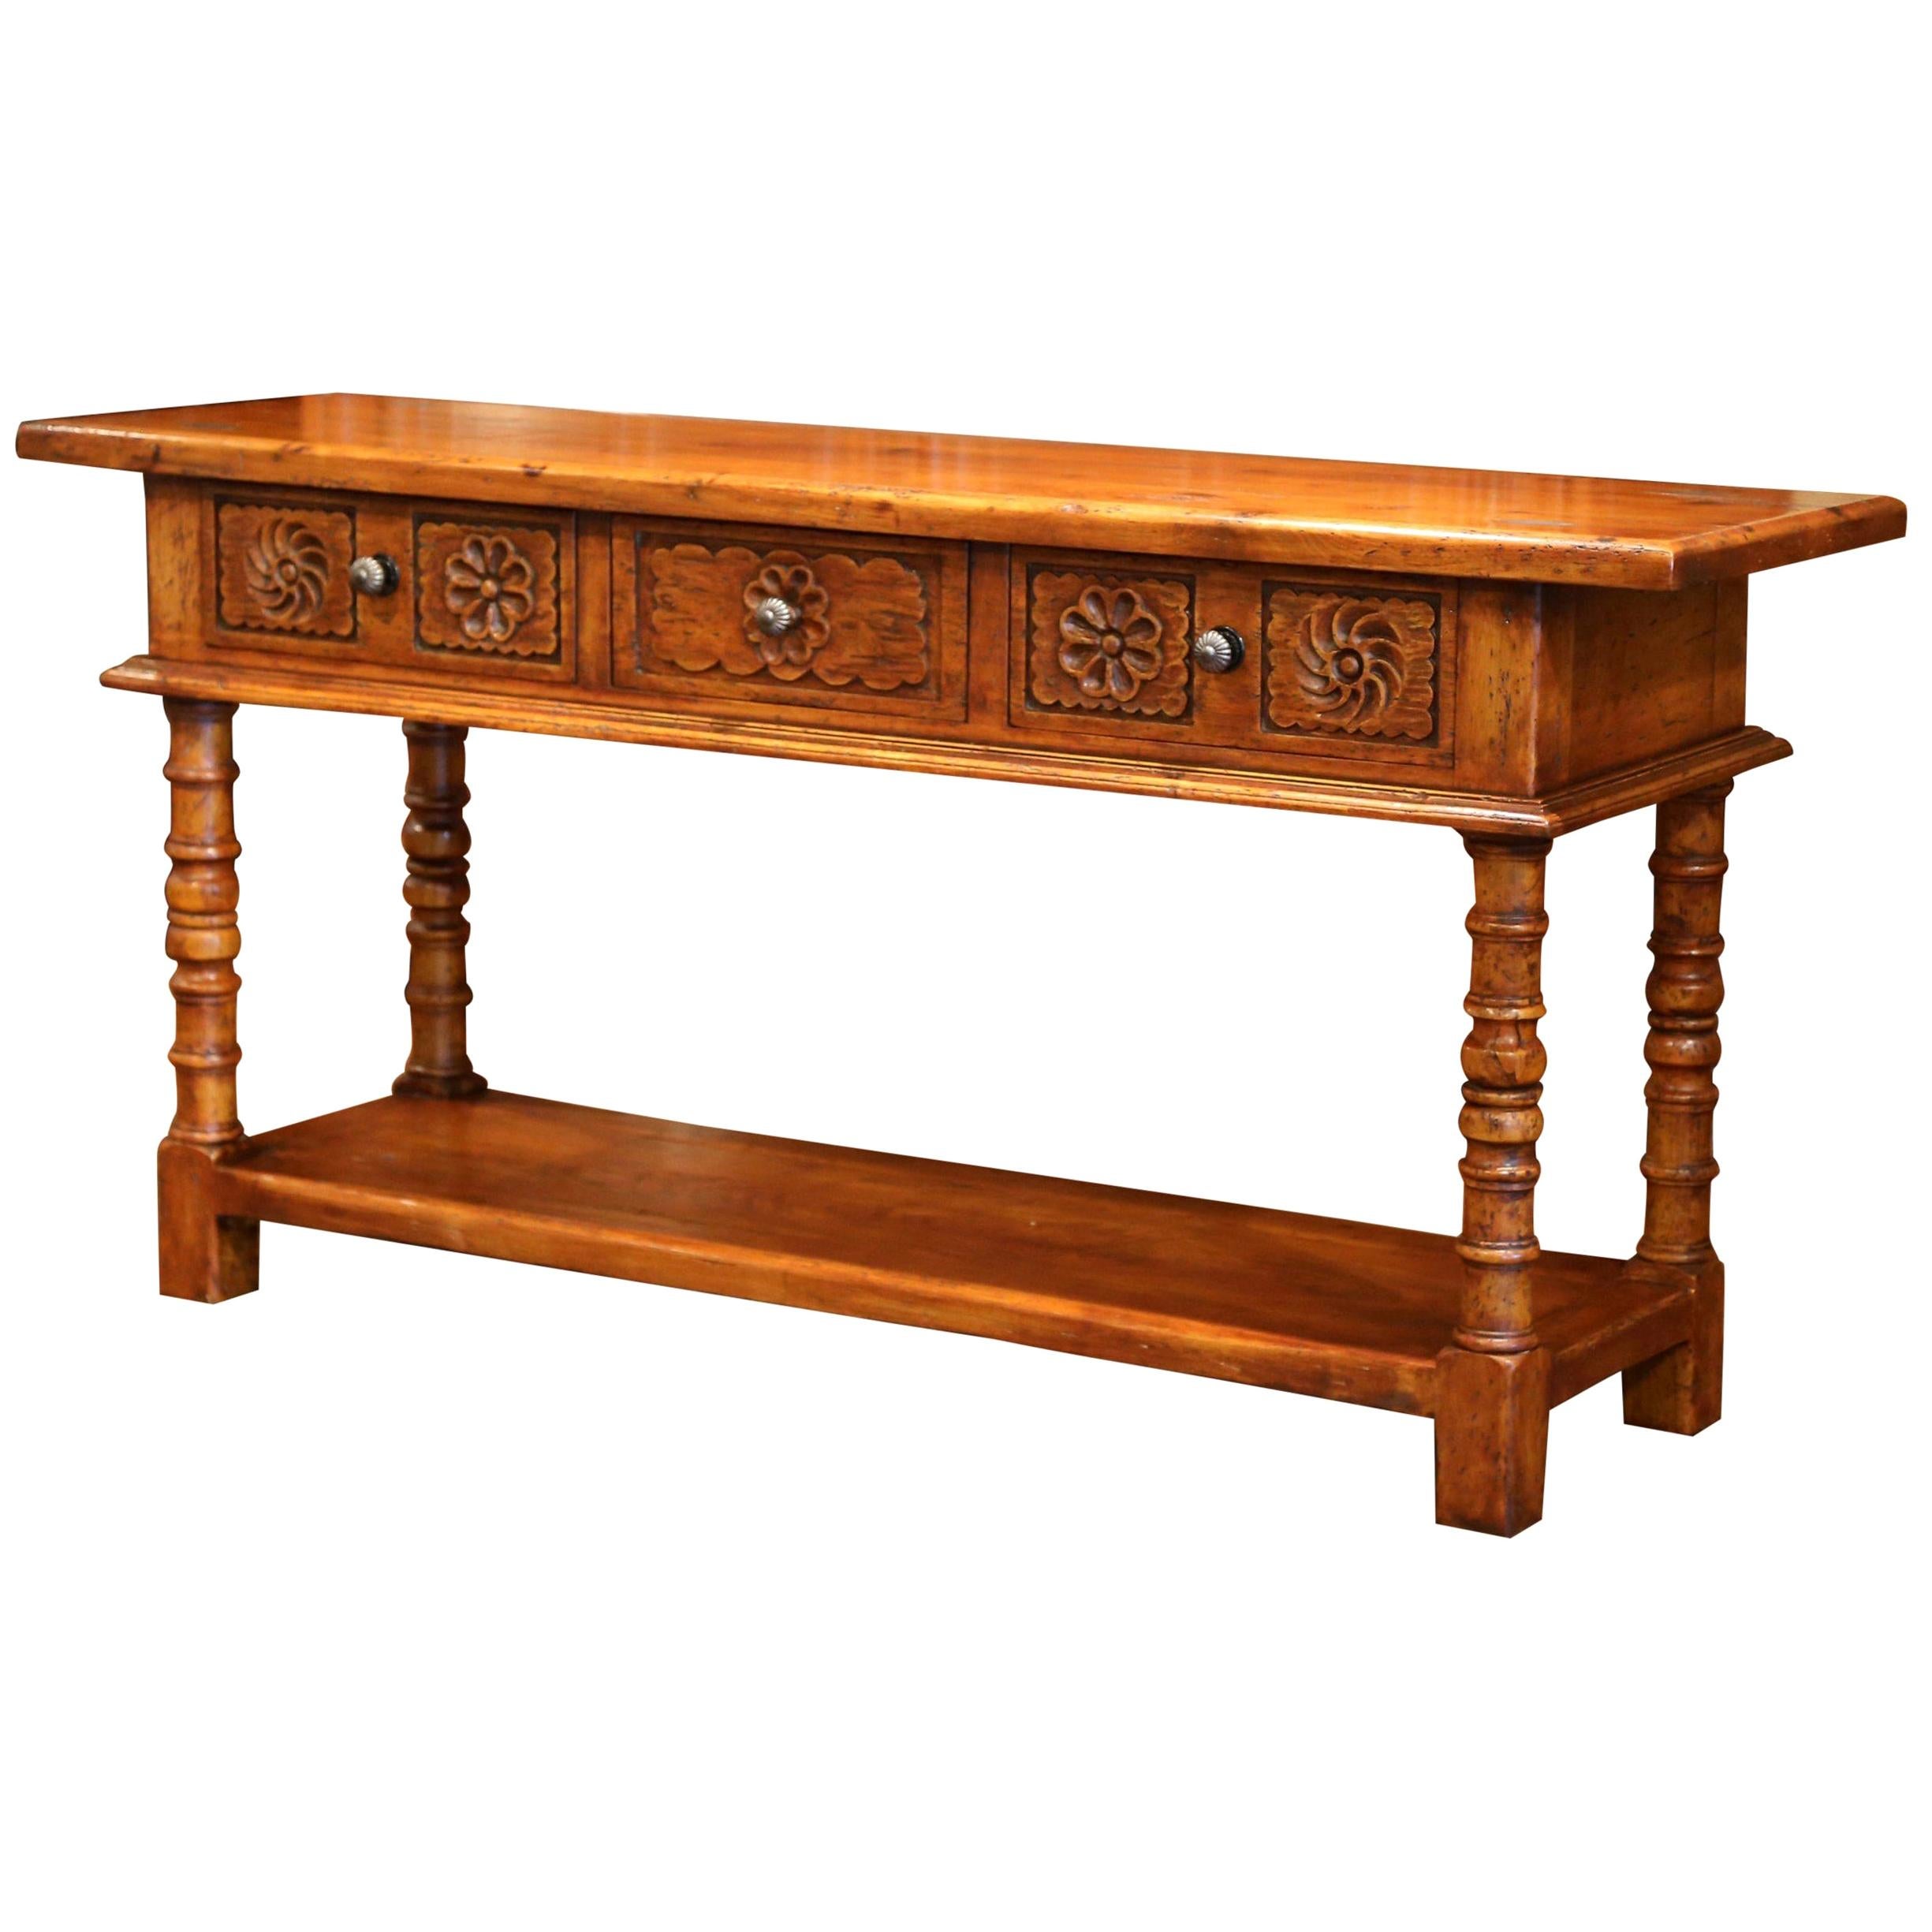 French Louis XIII Carved Walnut Console Sofa Table with Drawers